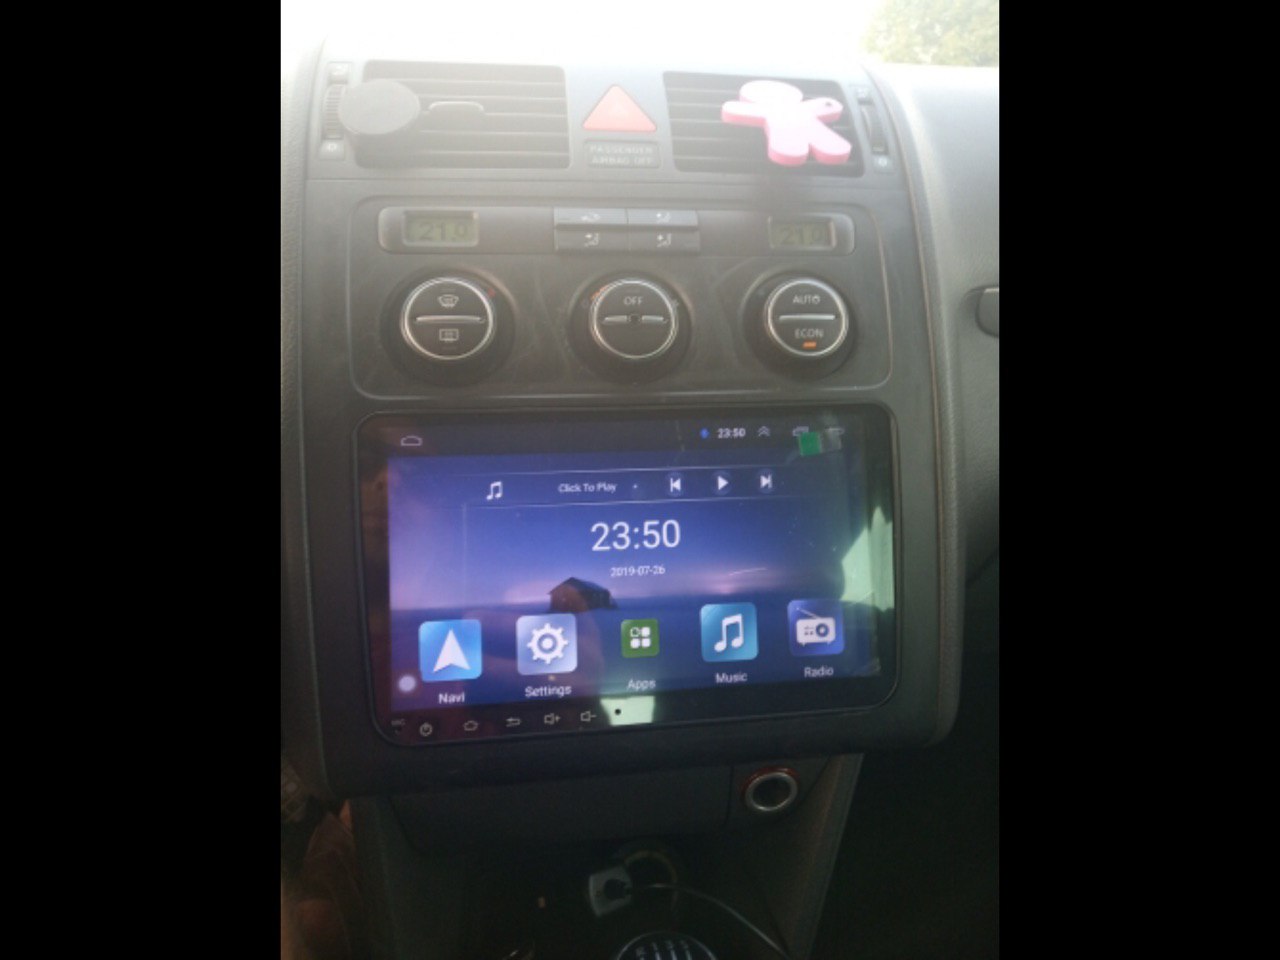 Suitable for VW Android 8.1 Double DIN Head Unit + Reversing Camera for Volkswagen, Skoda Bluetooth, Radio, Video Player